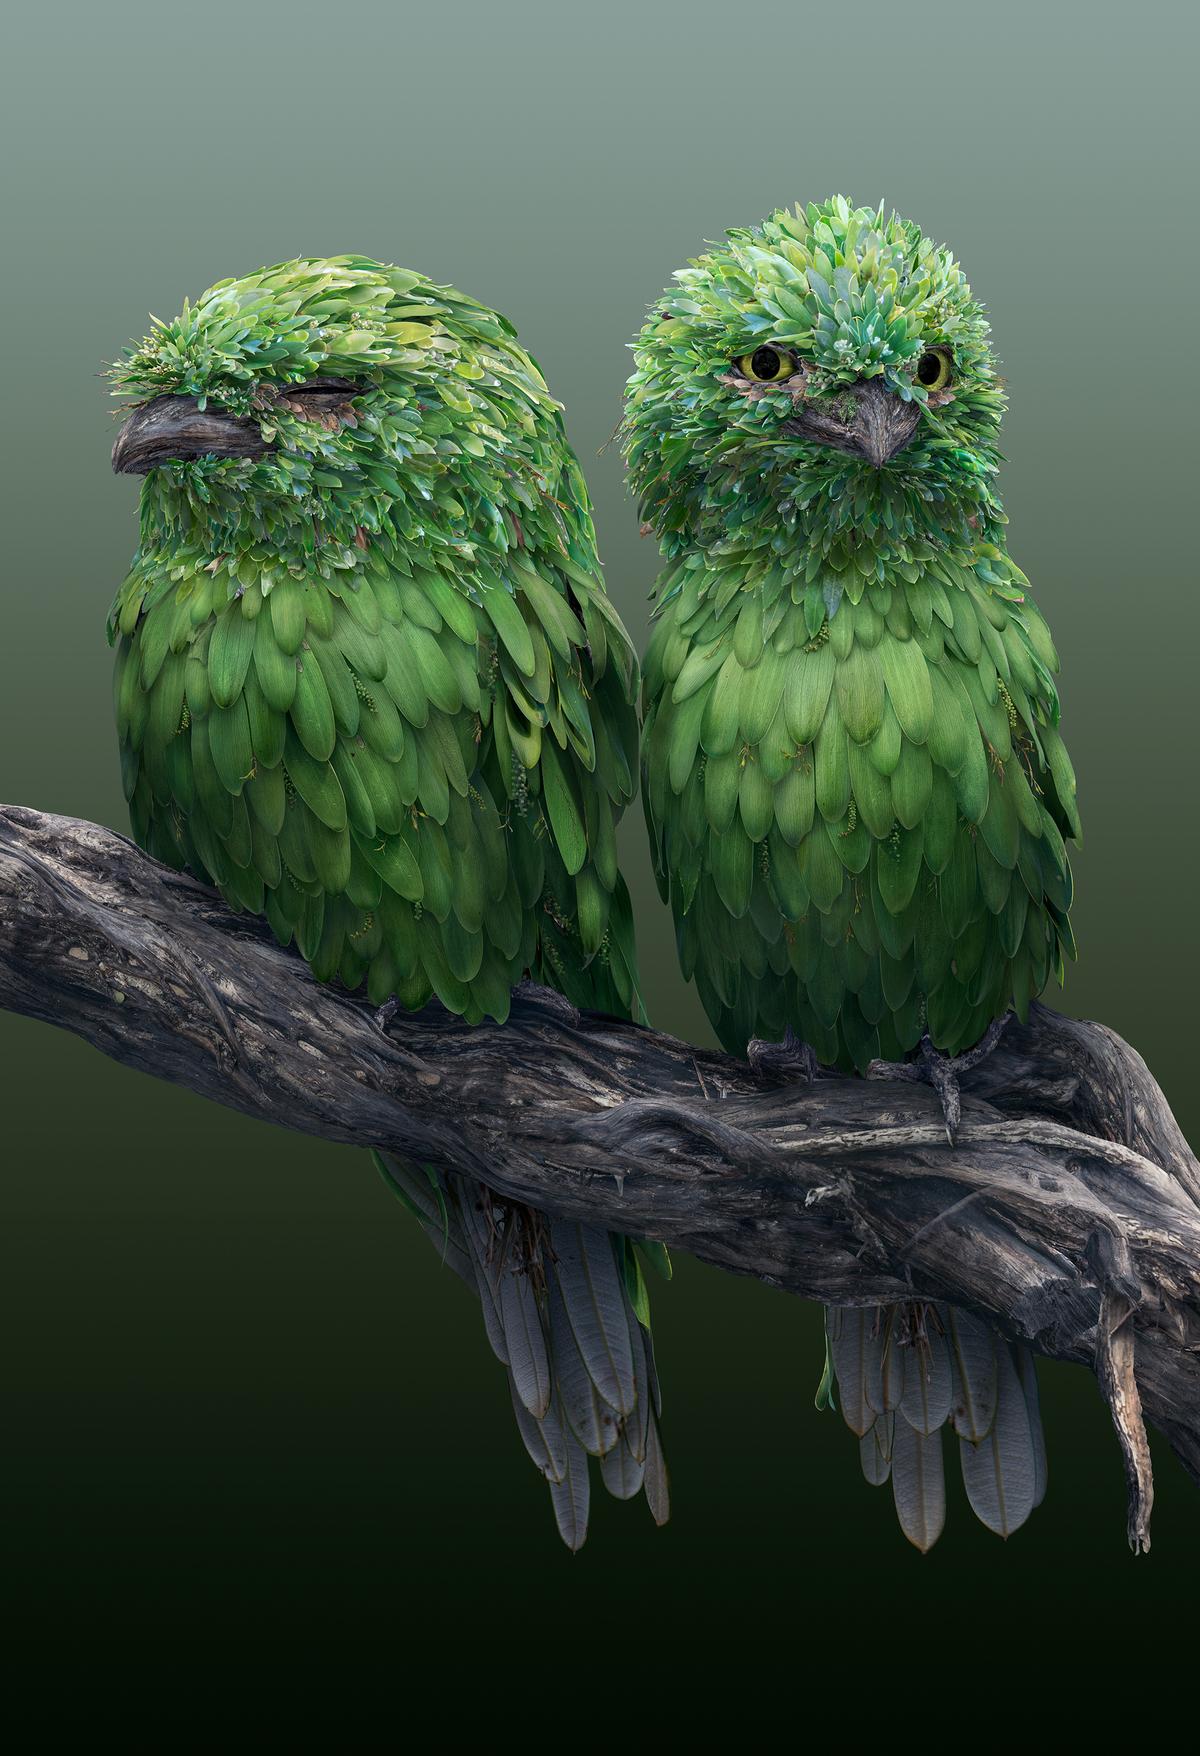 Hundreds of tiny leaves are combined to create two tawny frogmouth birds. (Courtesy of <a href="https://www.instagram.com/joshdykgraaf/">Josh Dykgraaf</a>)